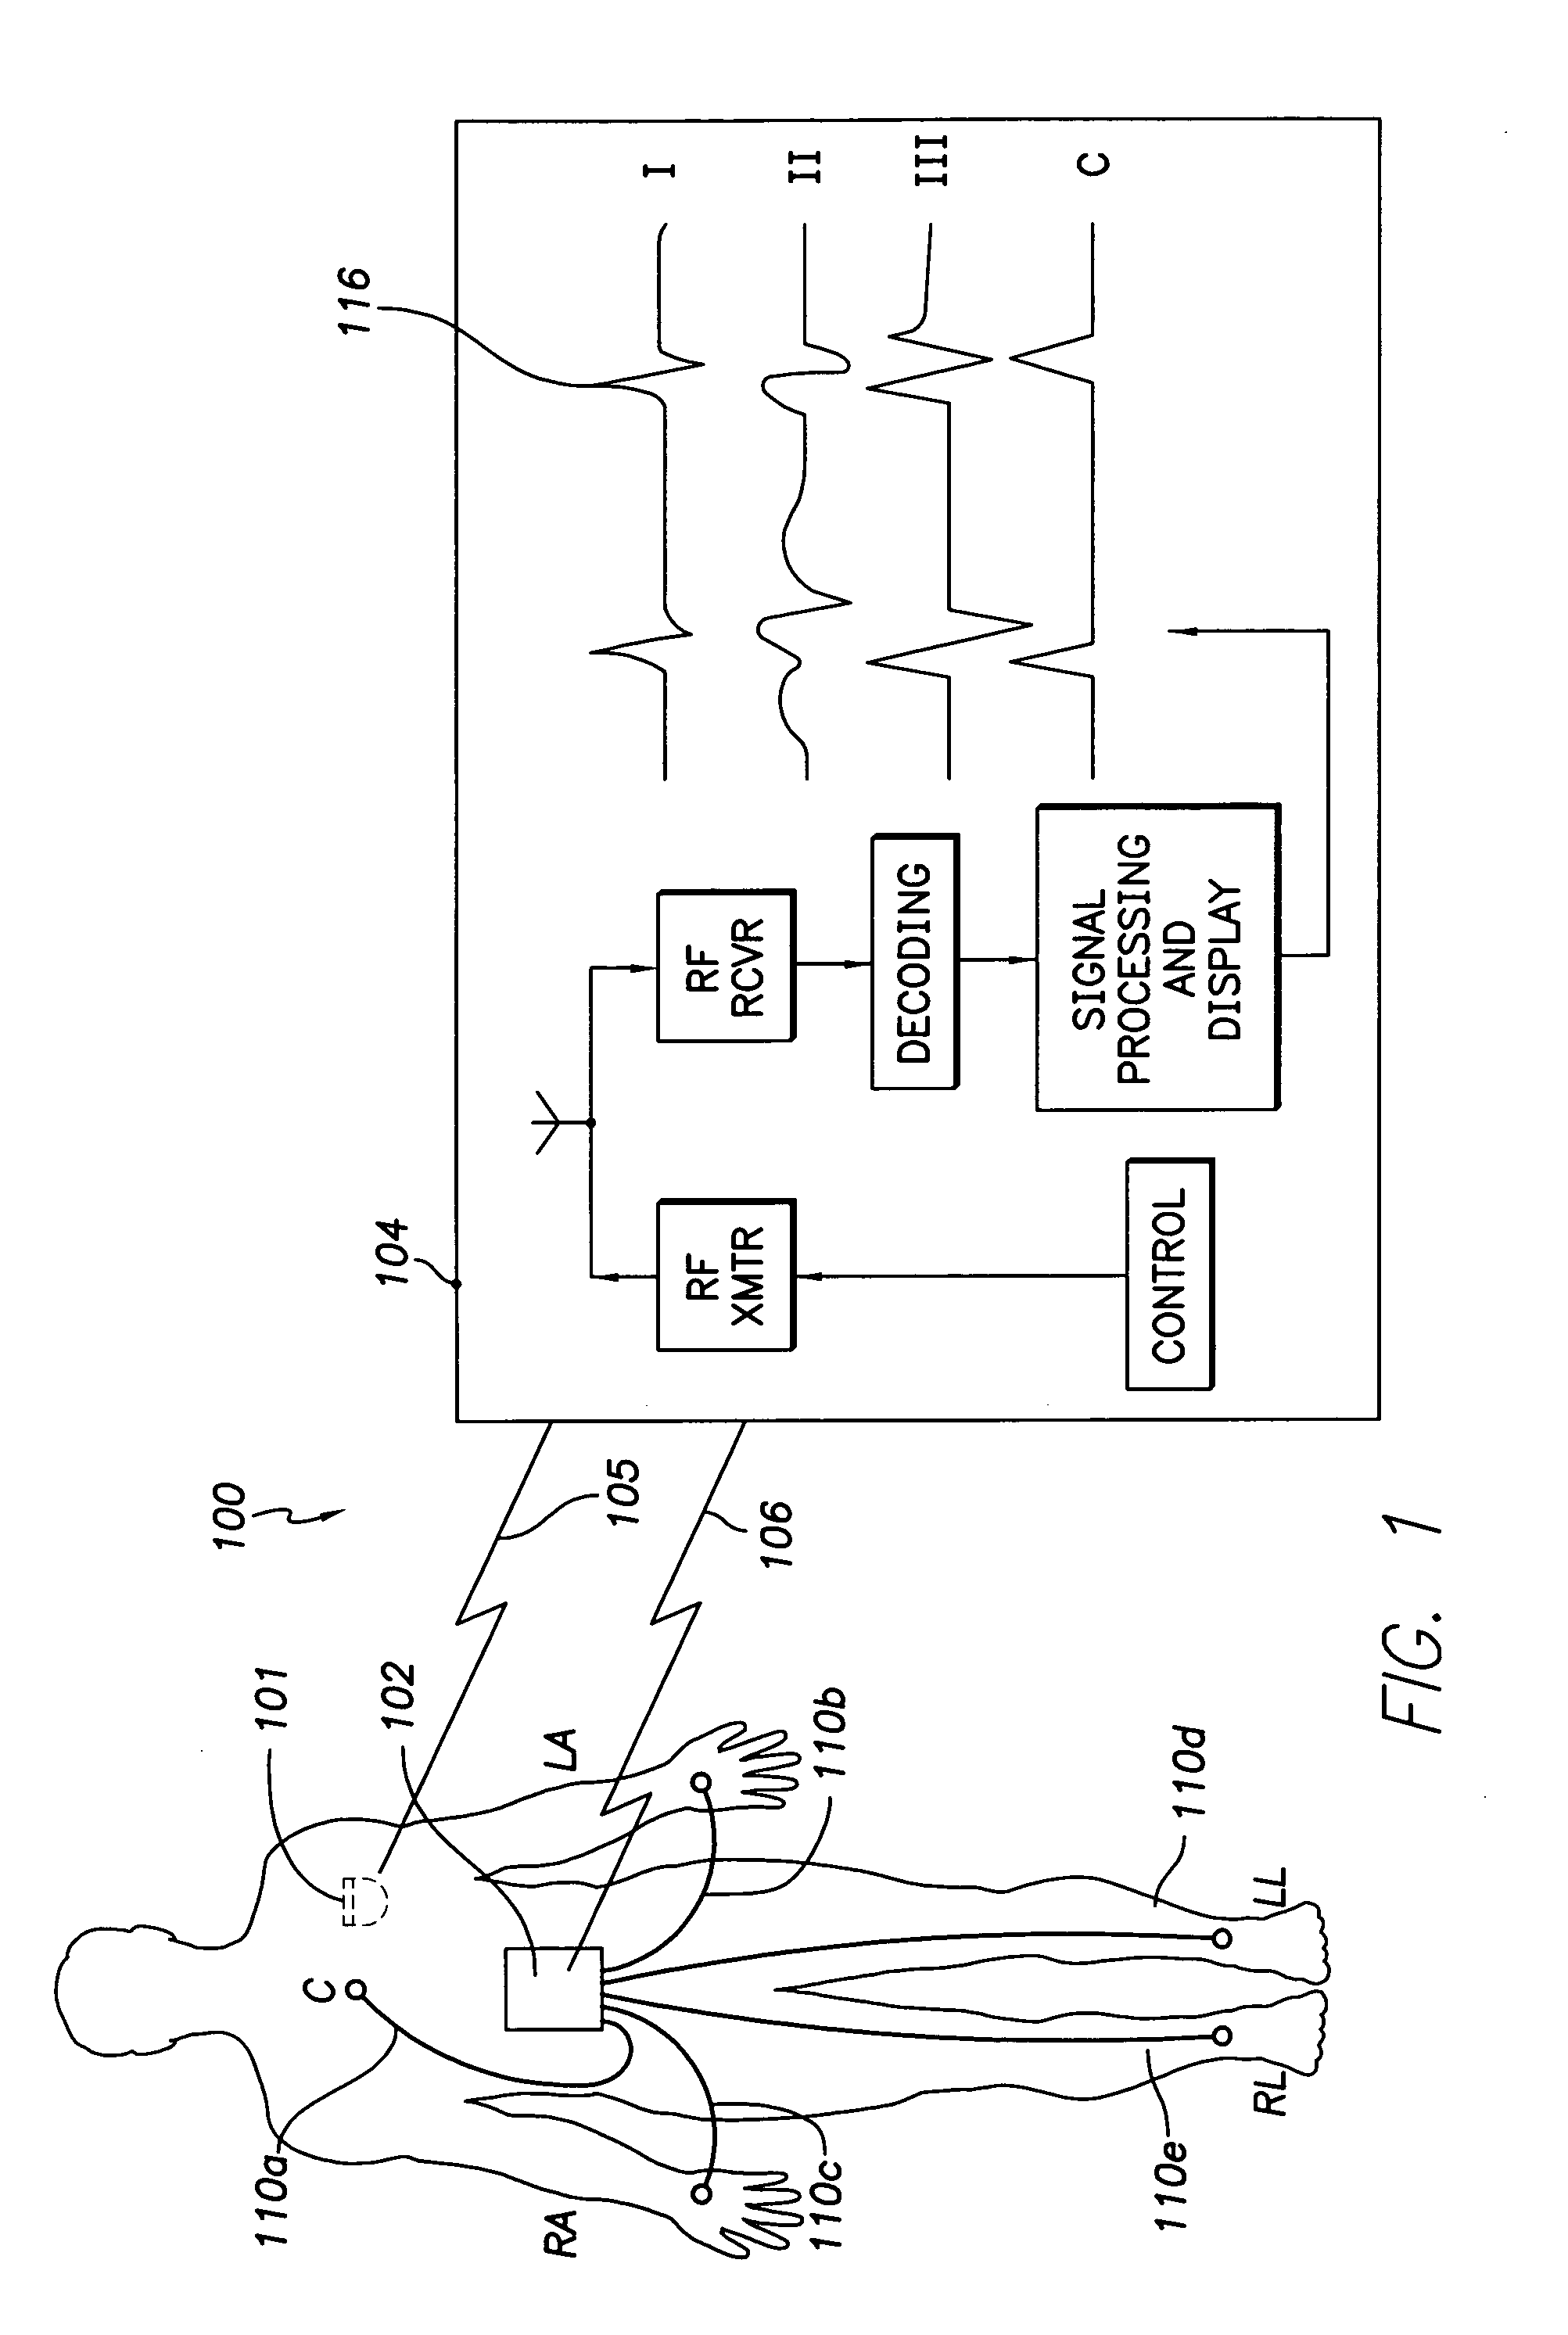 Programmer and surface ECG system with wireless communication